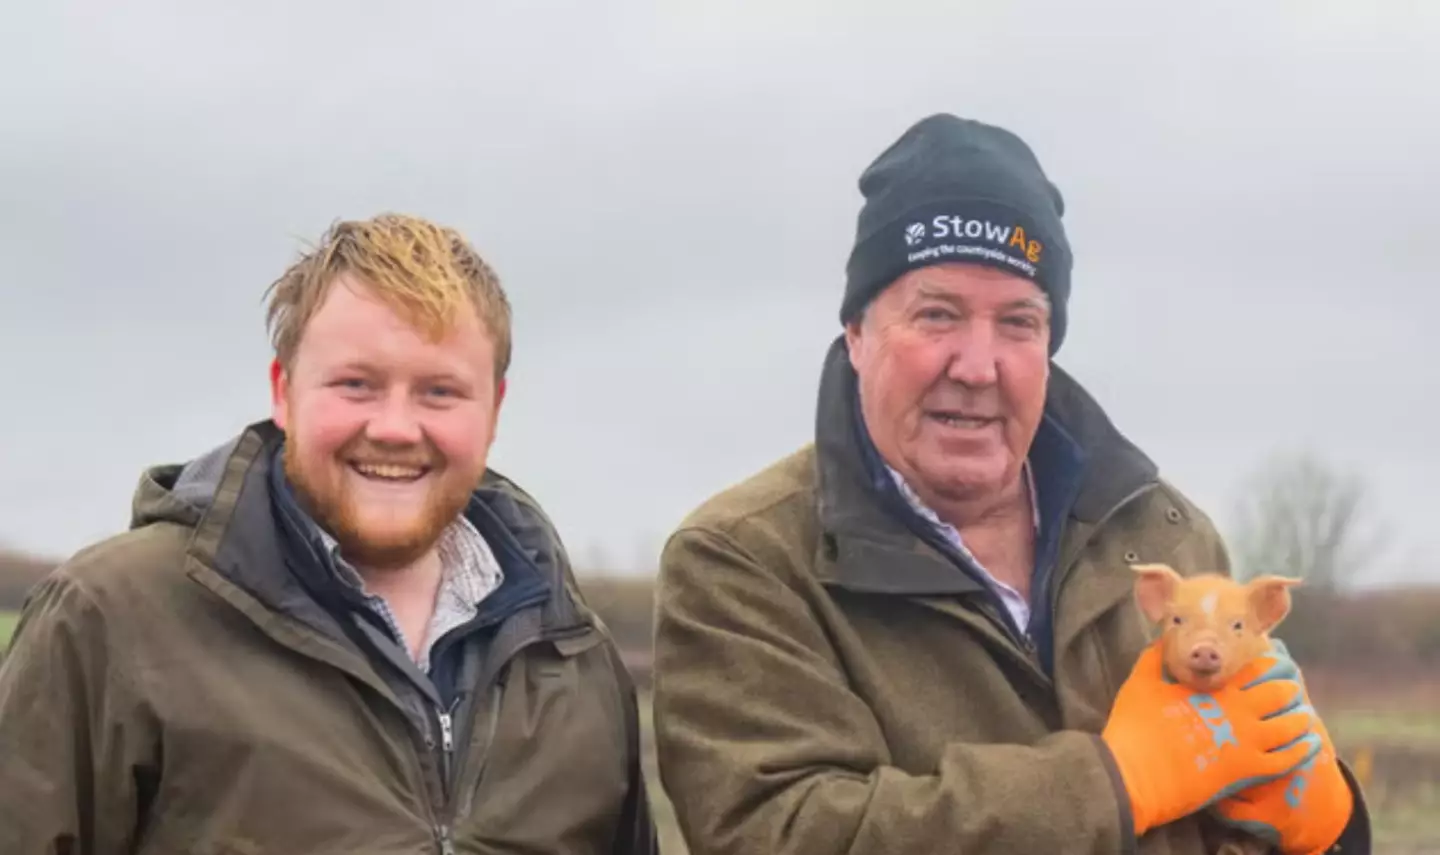 A new season of Clarkson's Farm will premiere in May.